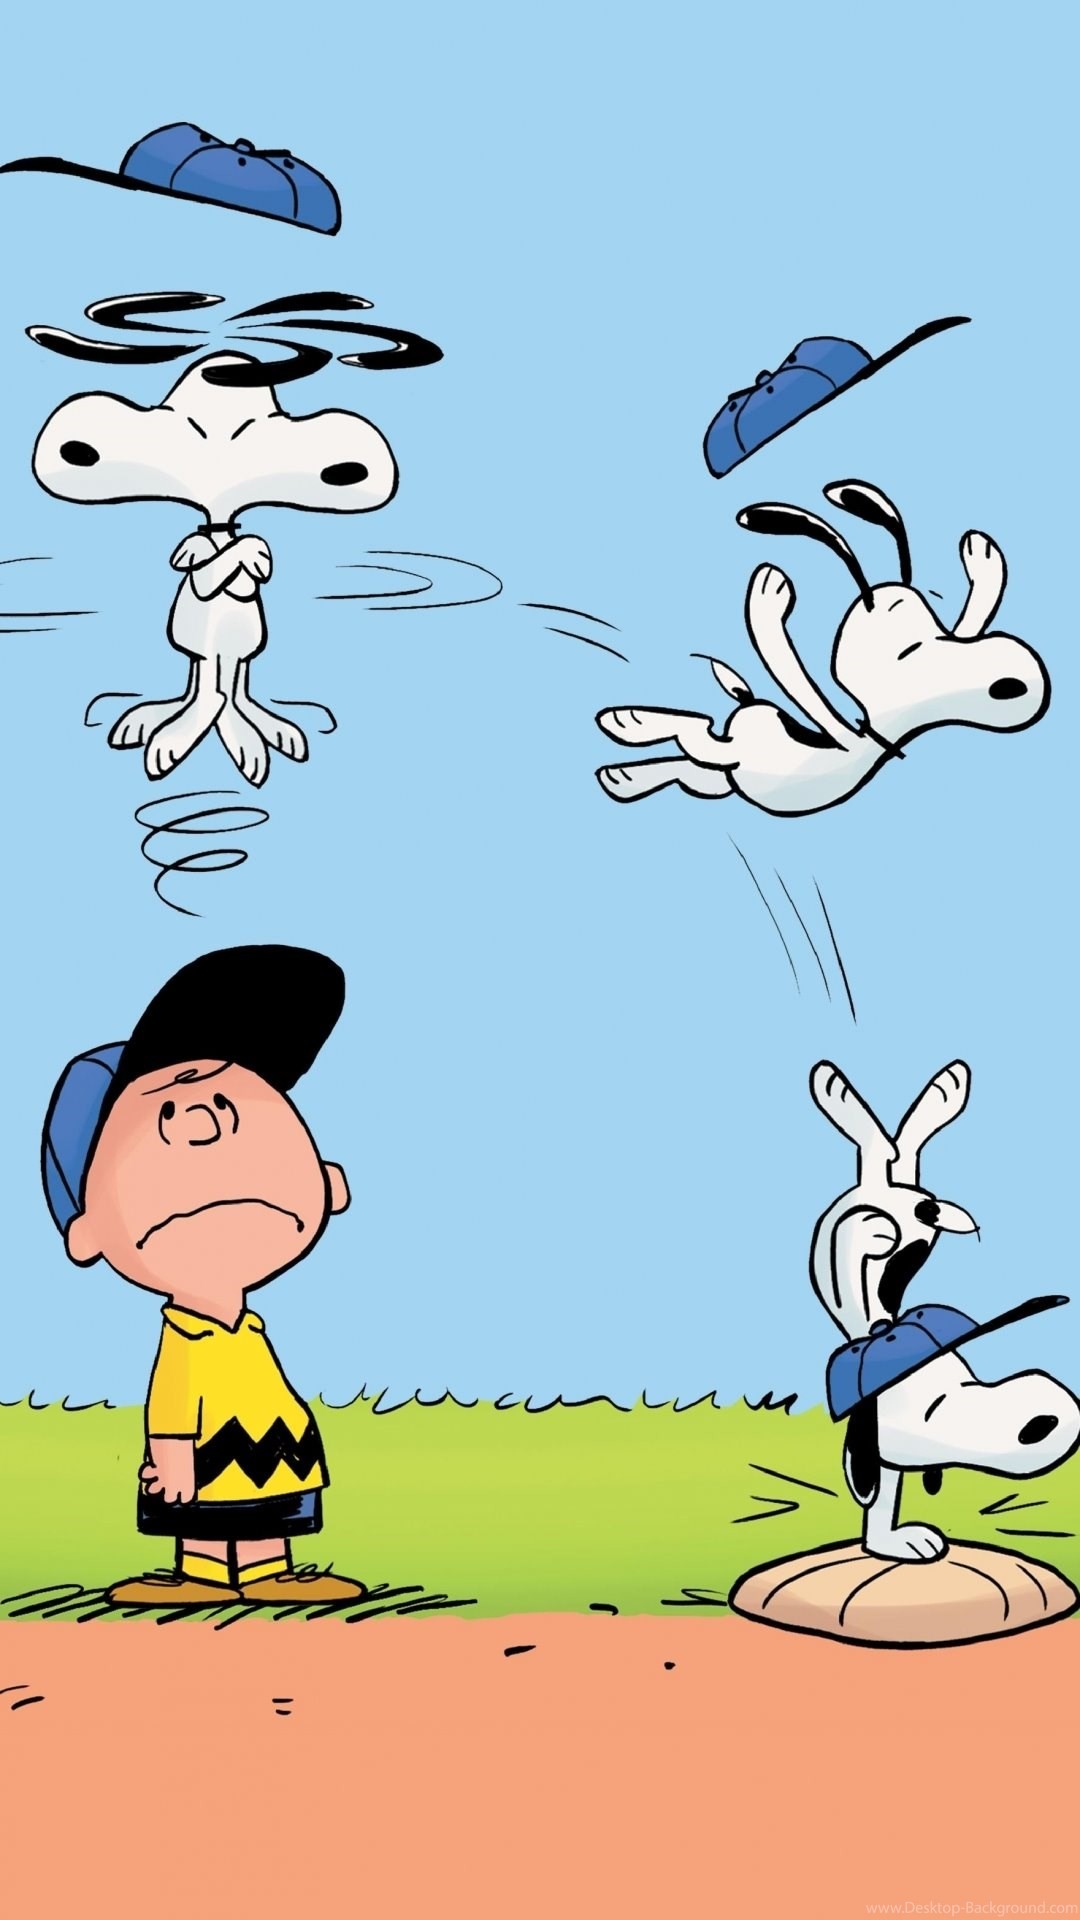 Happy Spring  Snoopy pictures Snoopy comics Snoopy wallpaper